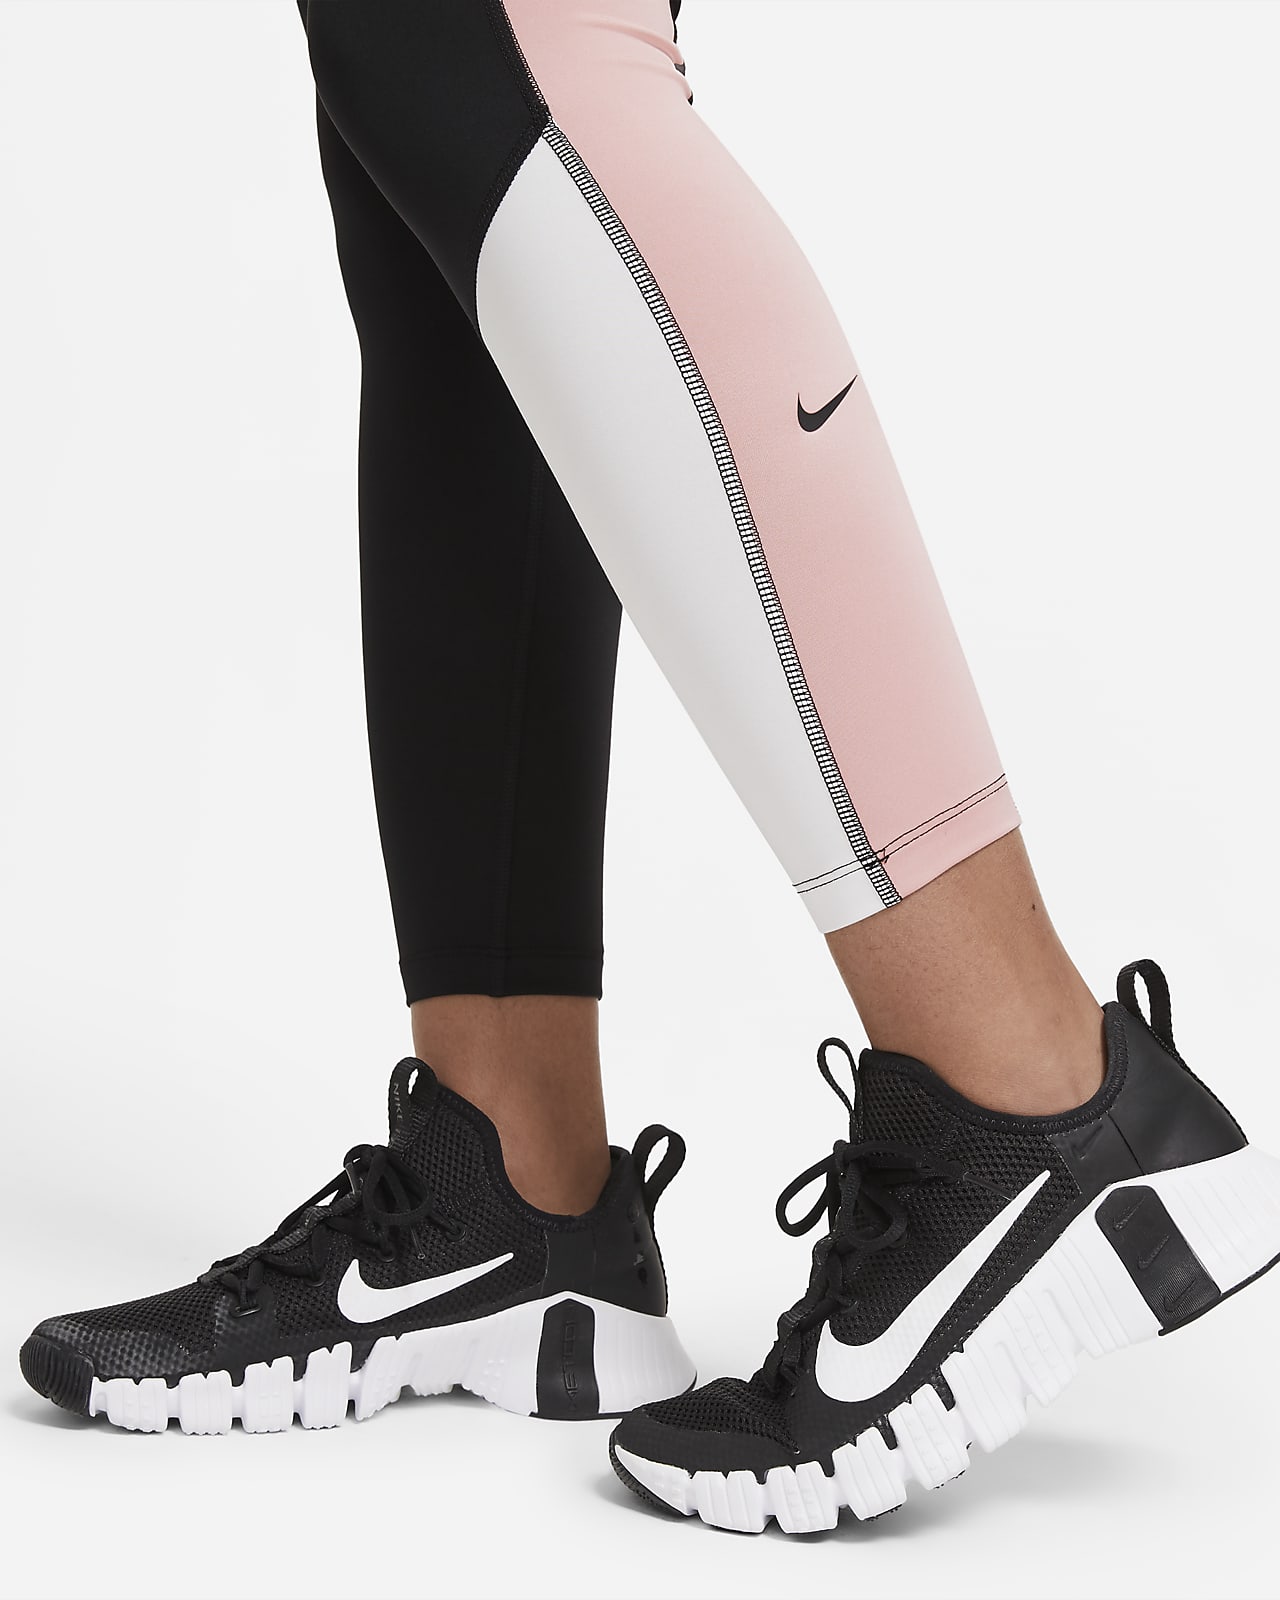 nike one color block tights